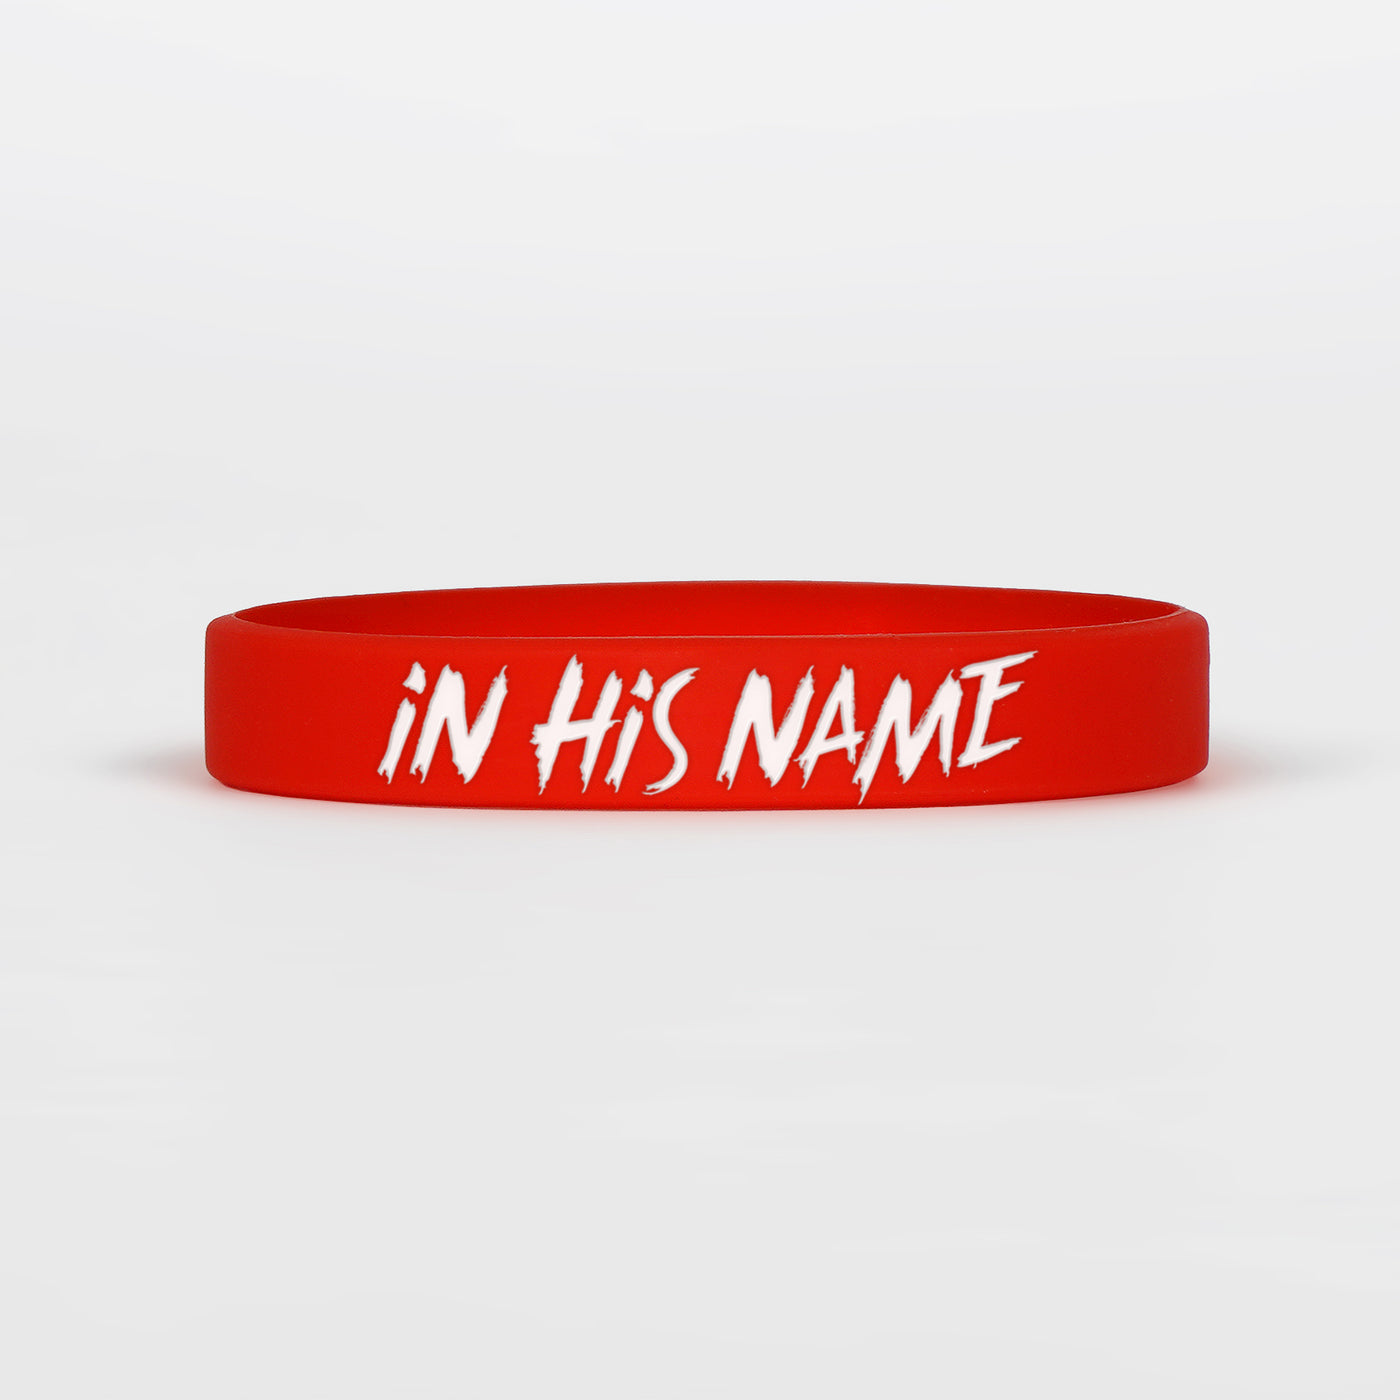 In His Name Motivational Wristband